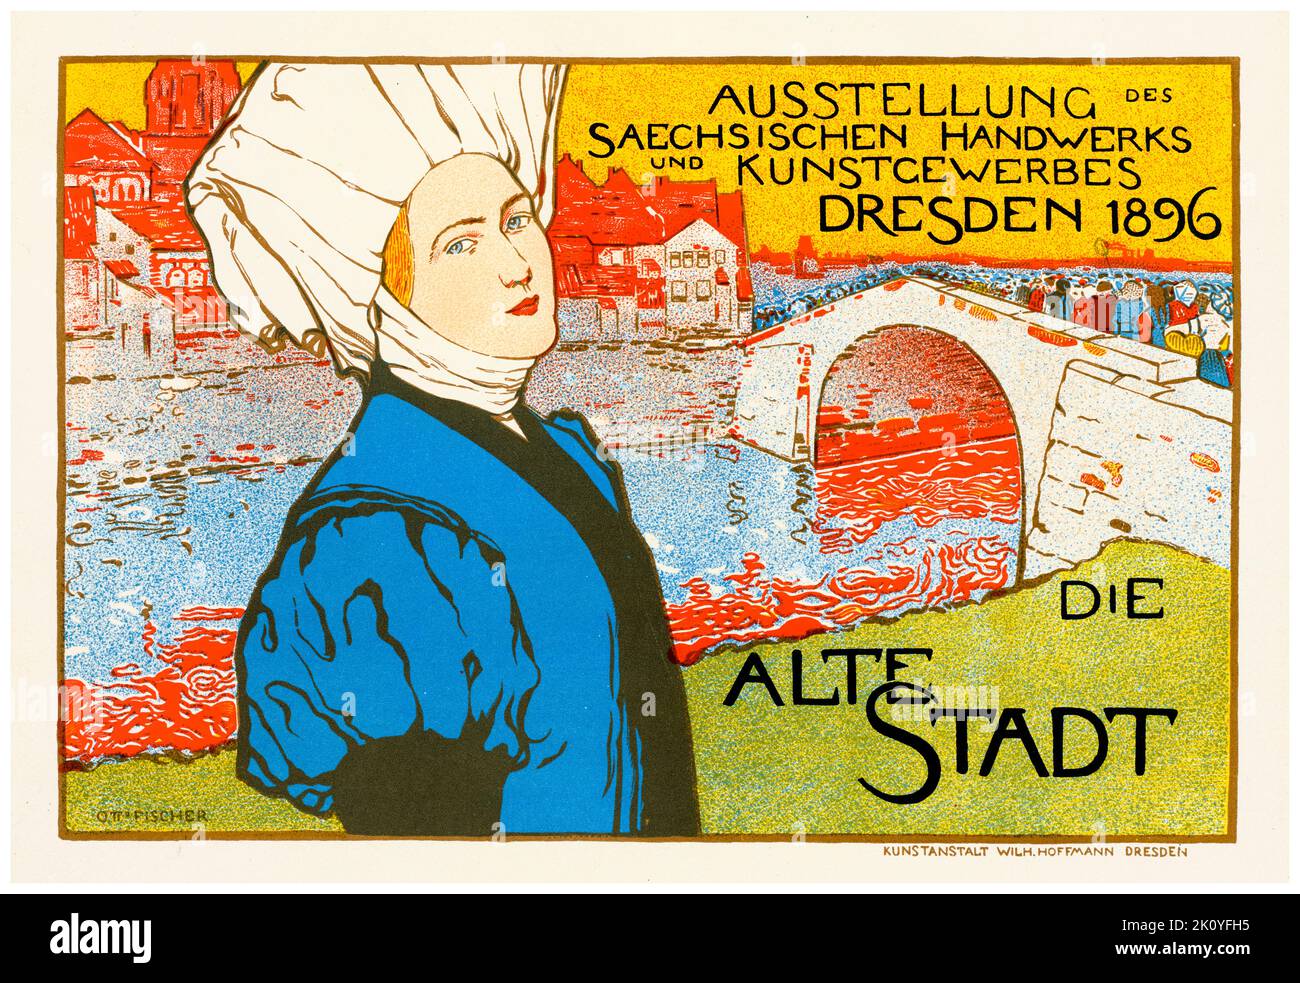 La Vielle Ville (Exhibition of Saxon Arts and Crafts, Dresden), poster by Otto Fischer, 1896 Stock Photo